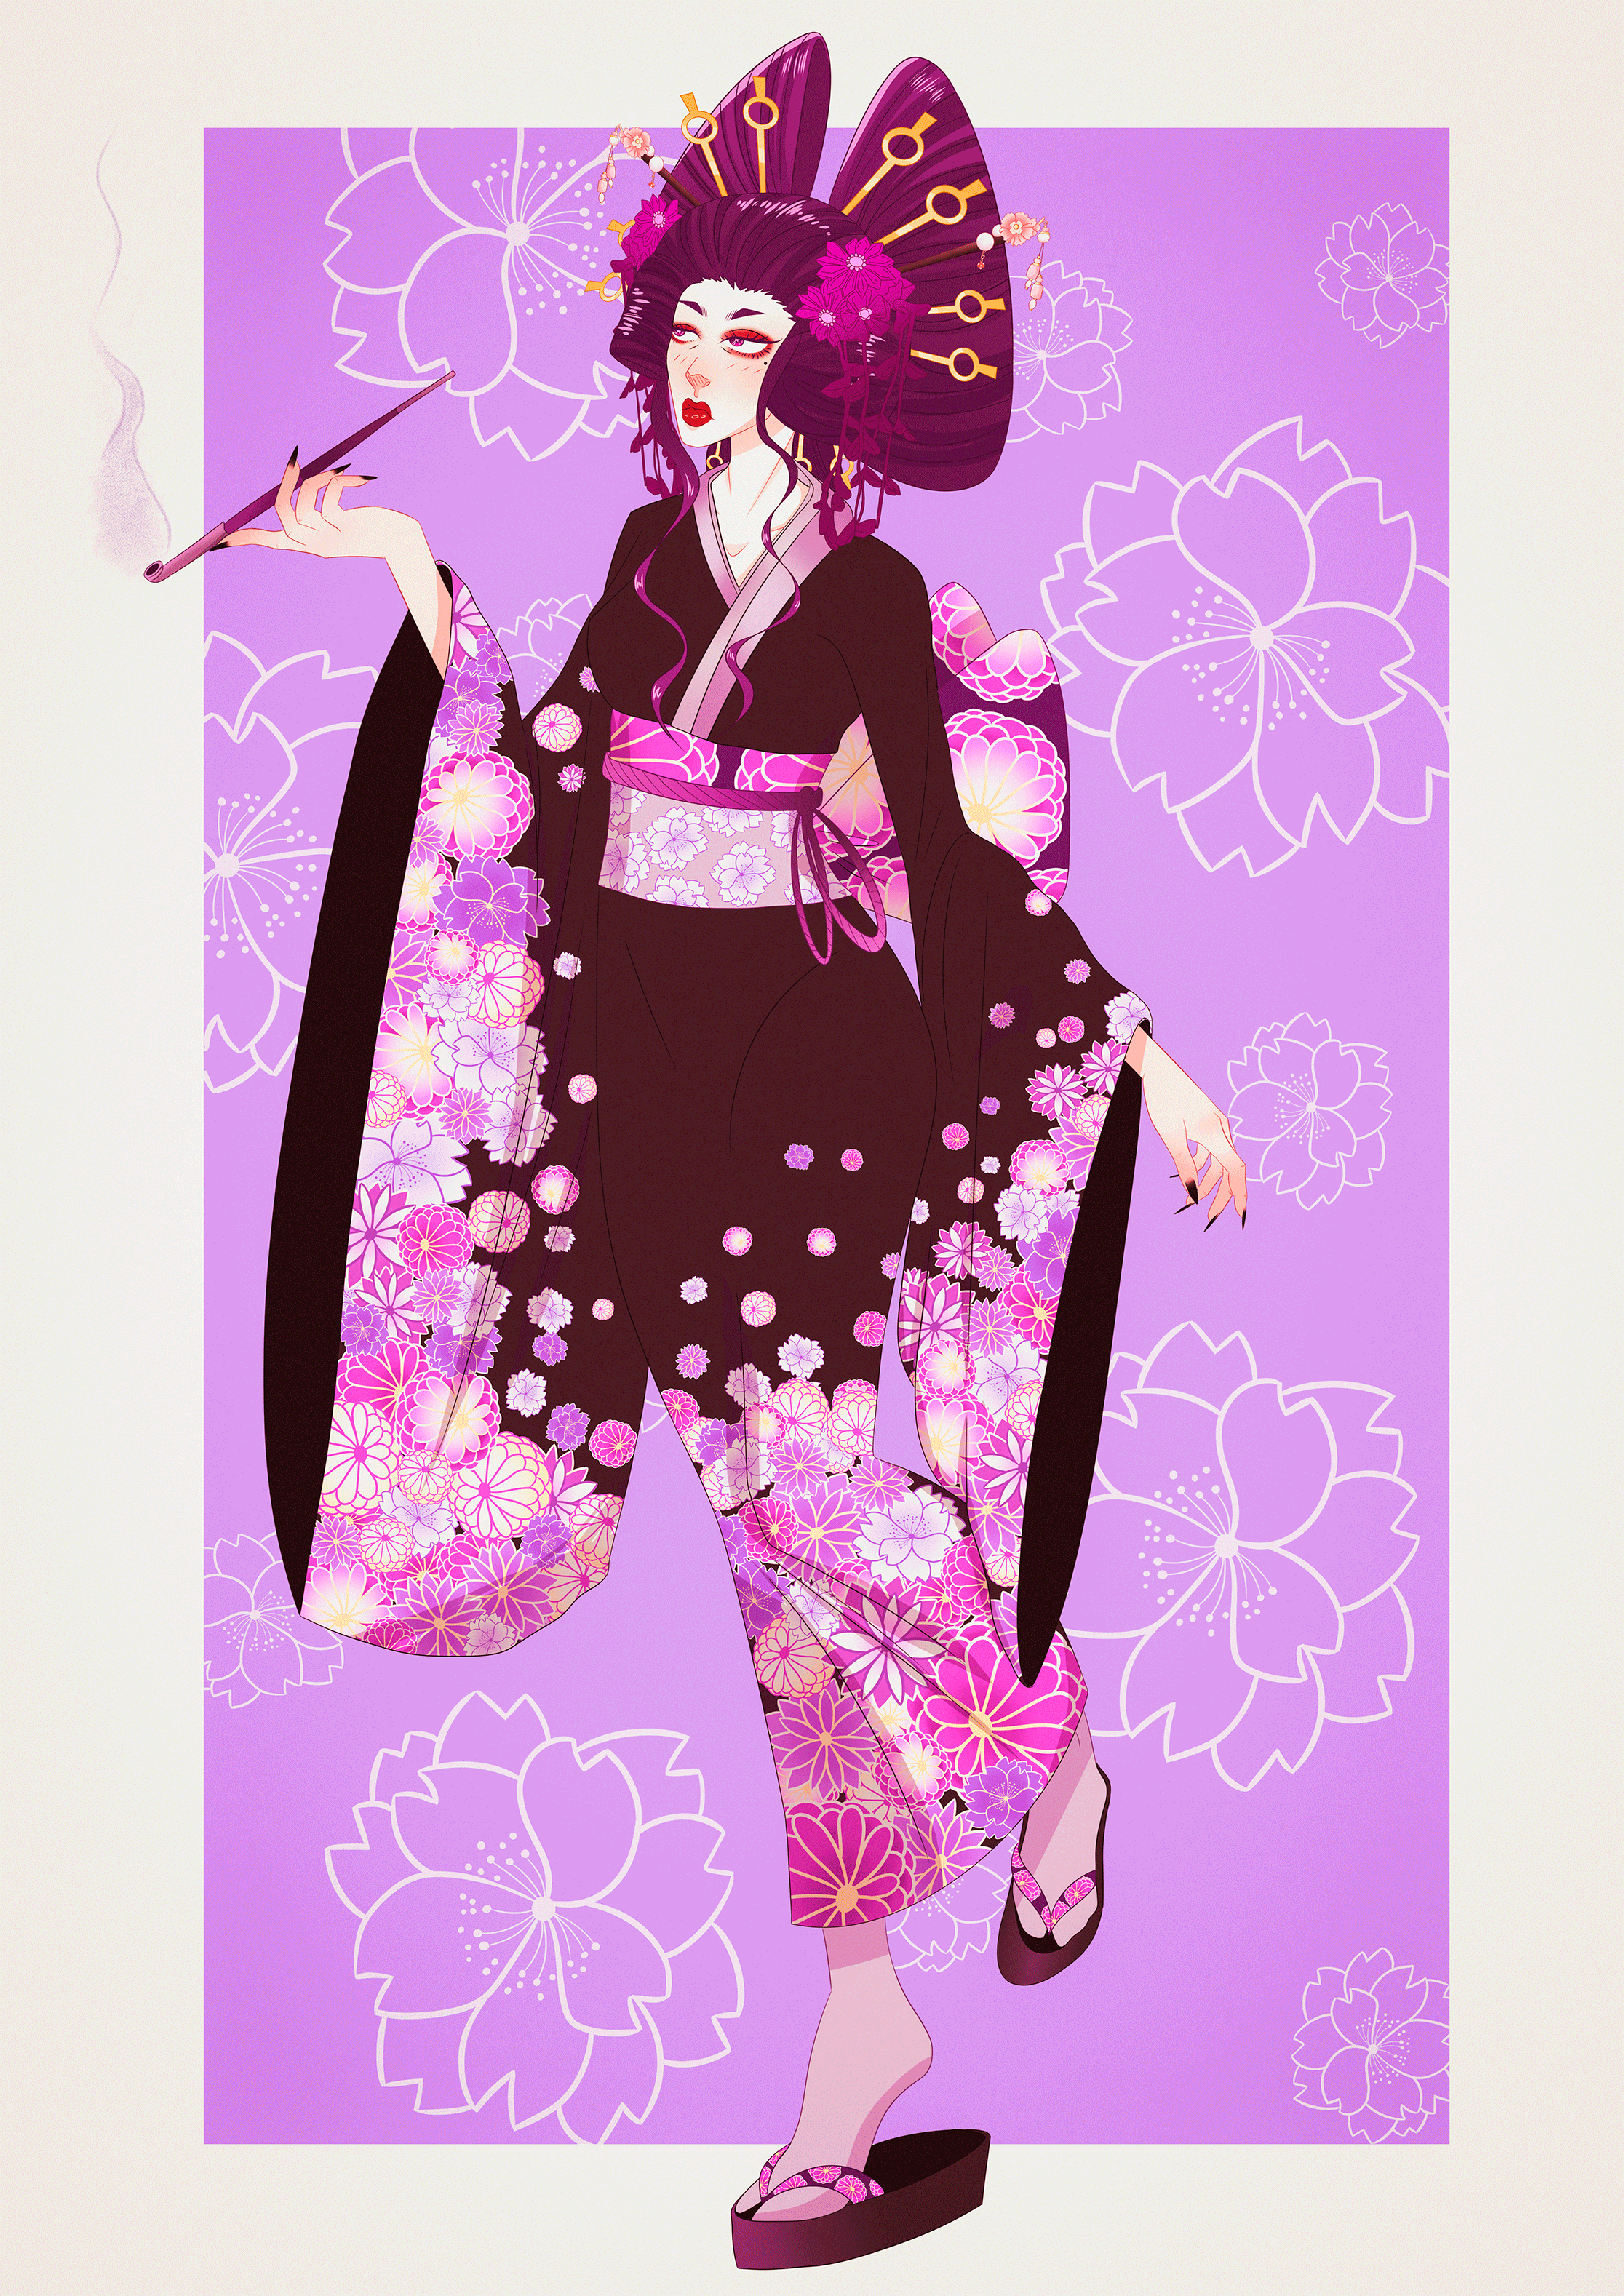 Digital character illustration inspired by Japanese fashion